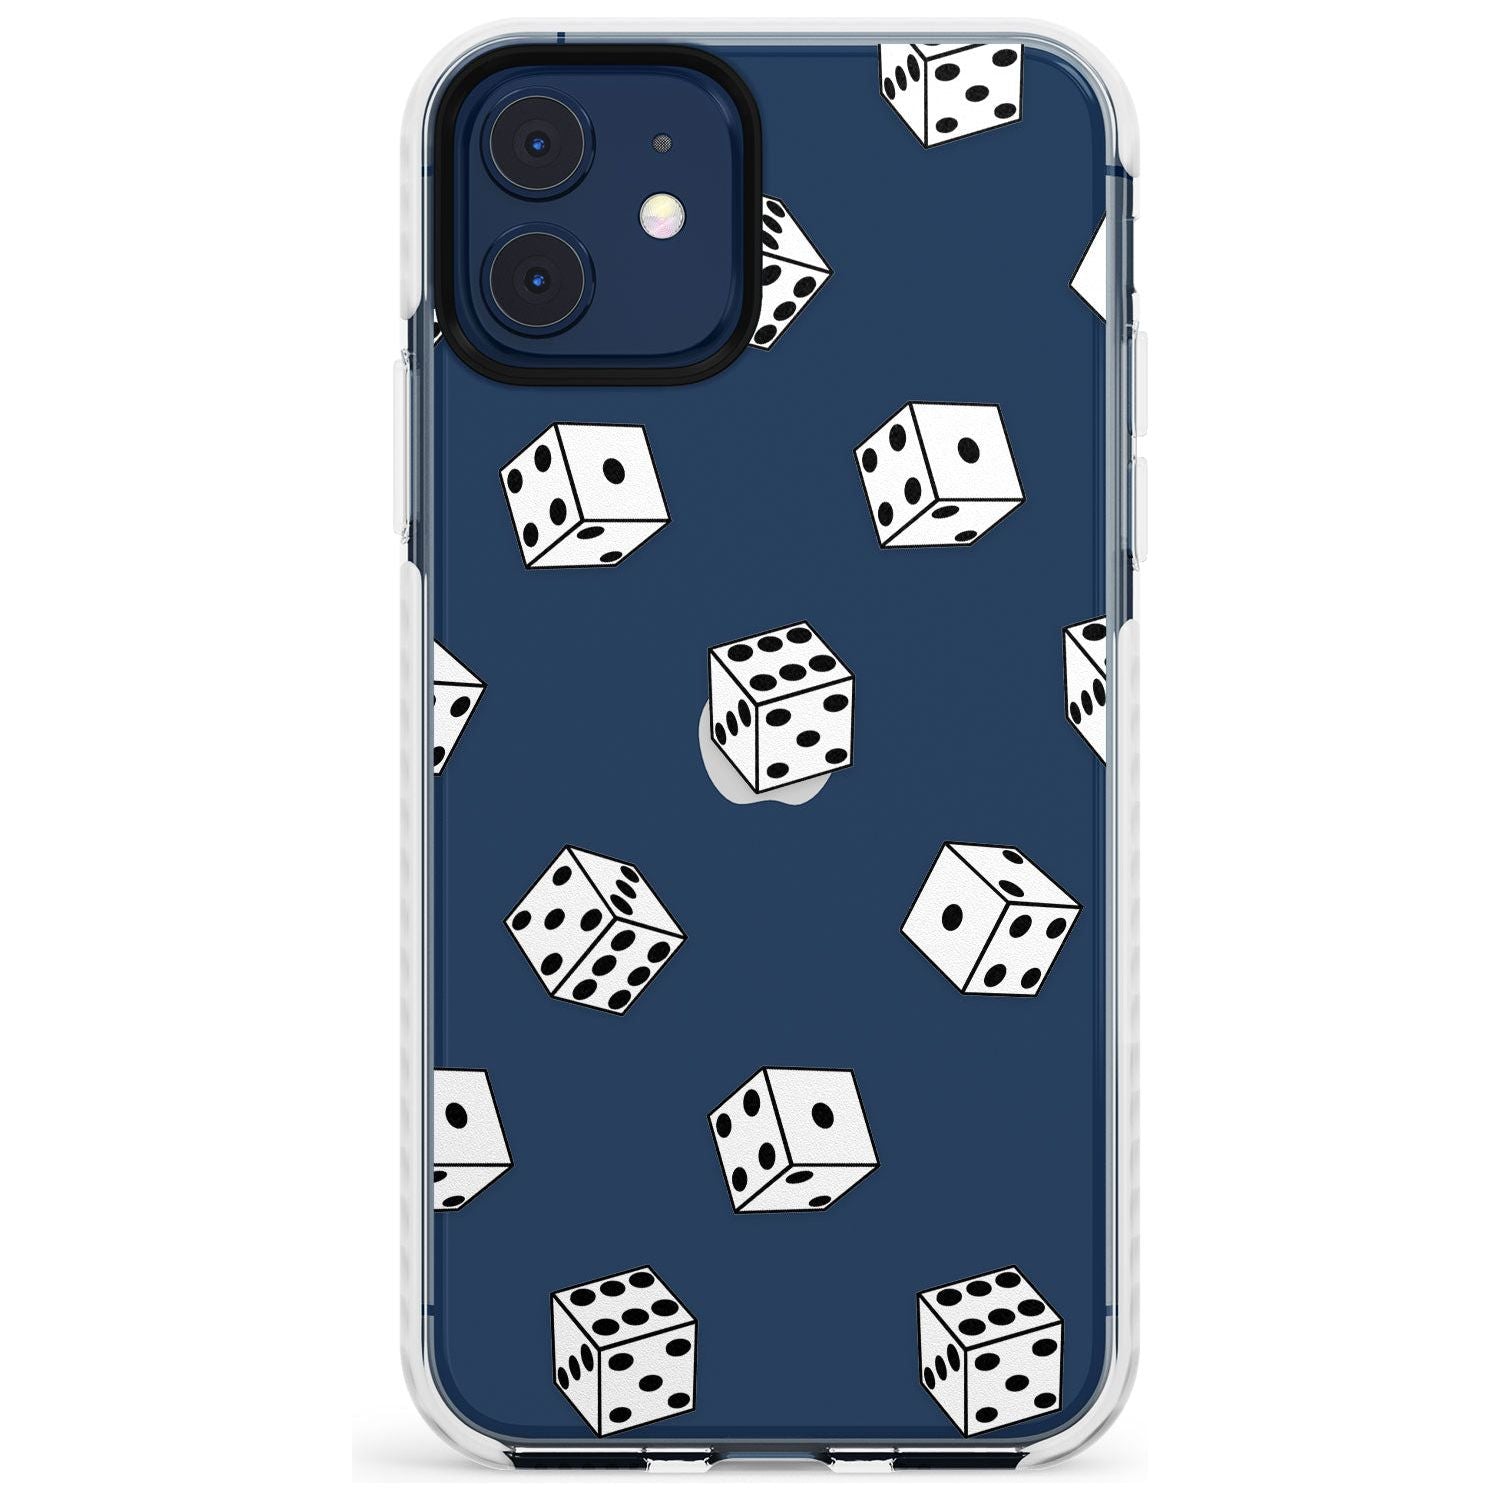 Clear Dice Pattern Impact Phone Case for iPhone 11